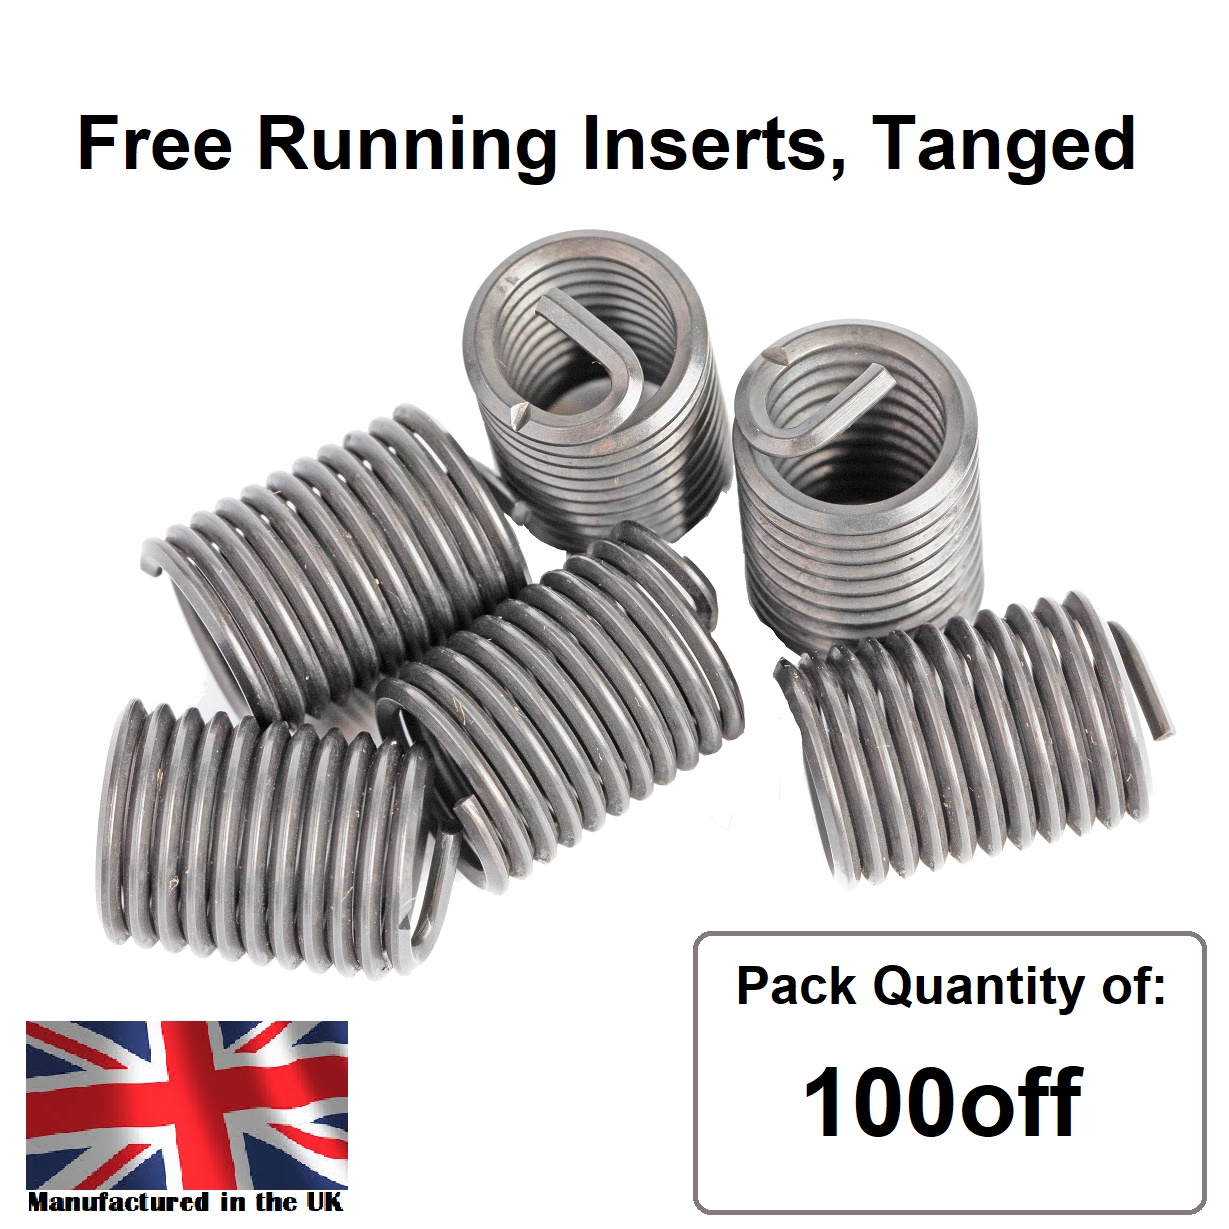 M10 x 1.5 x 1D Metric Coarse, Free Running, Tanged, Wire Thread Repair Insert, 304/A2 Stainless (Pack 100)